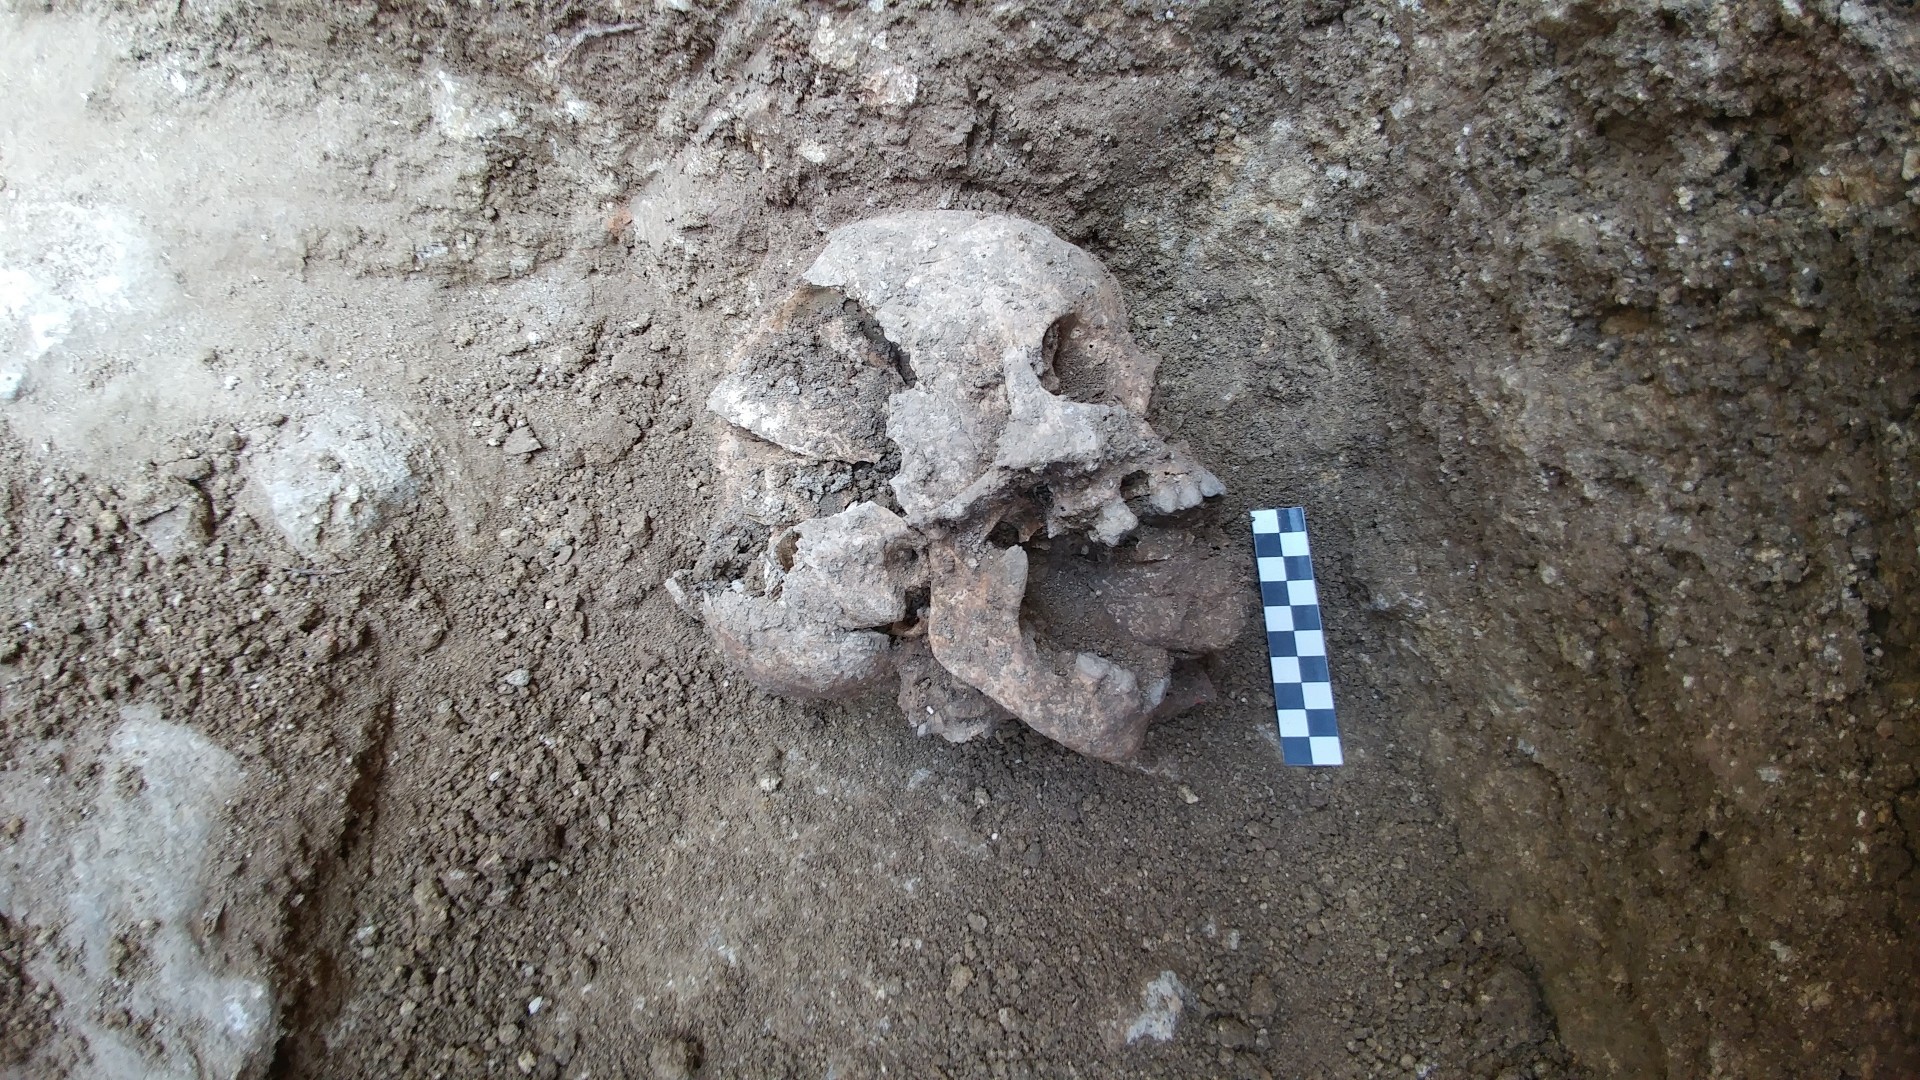 Fear of reanimated corpses may explain mysterious burials at 1,600-year-old cemetery thumbnail